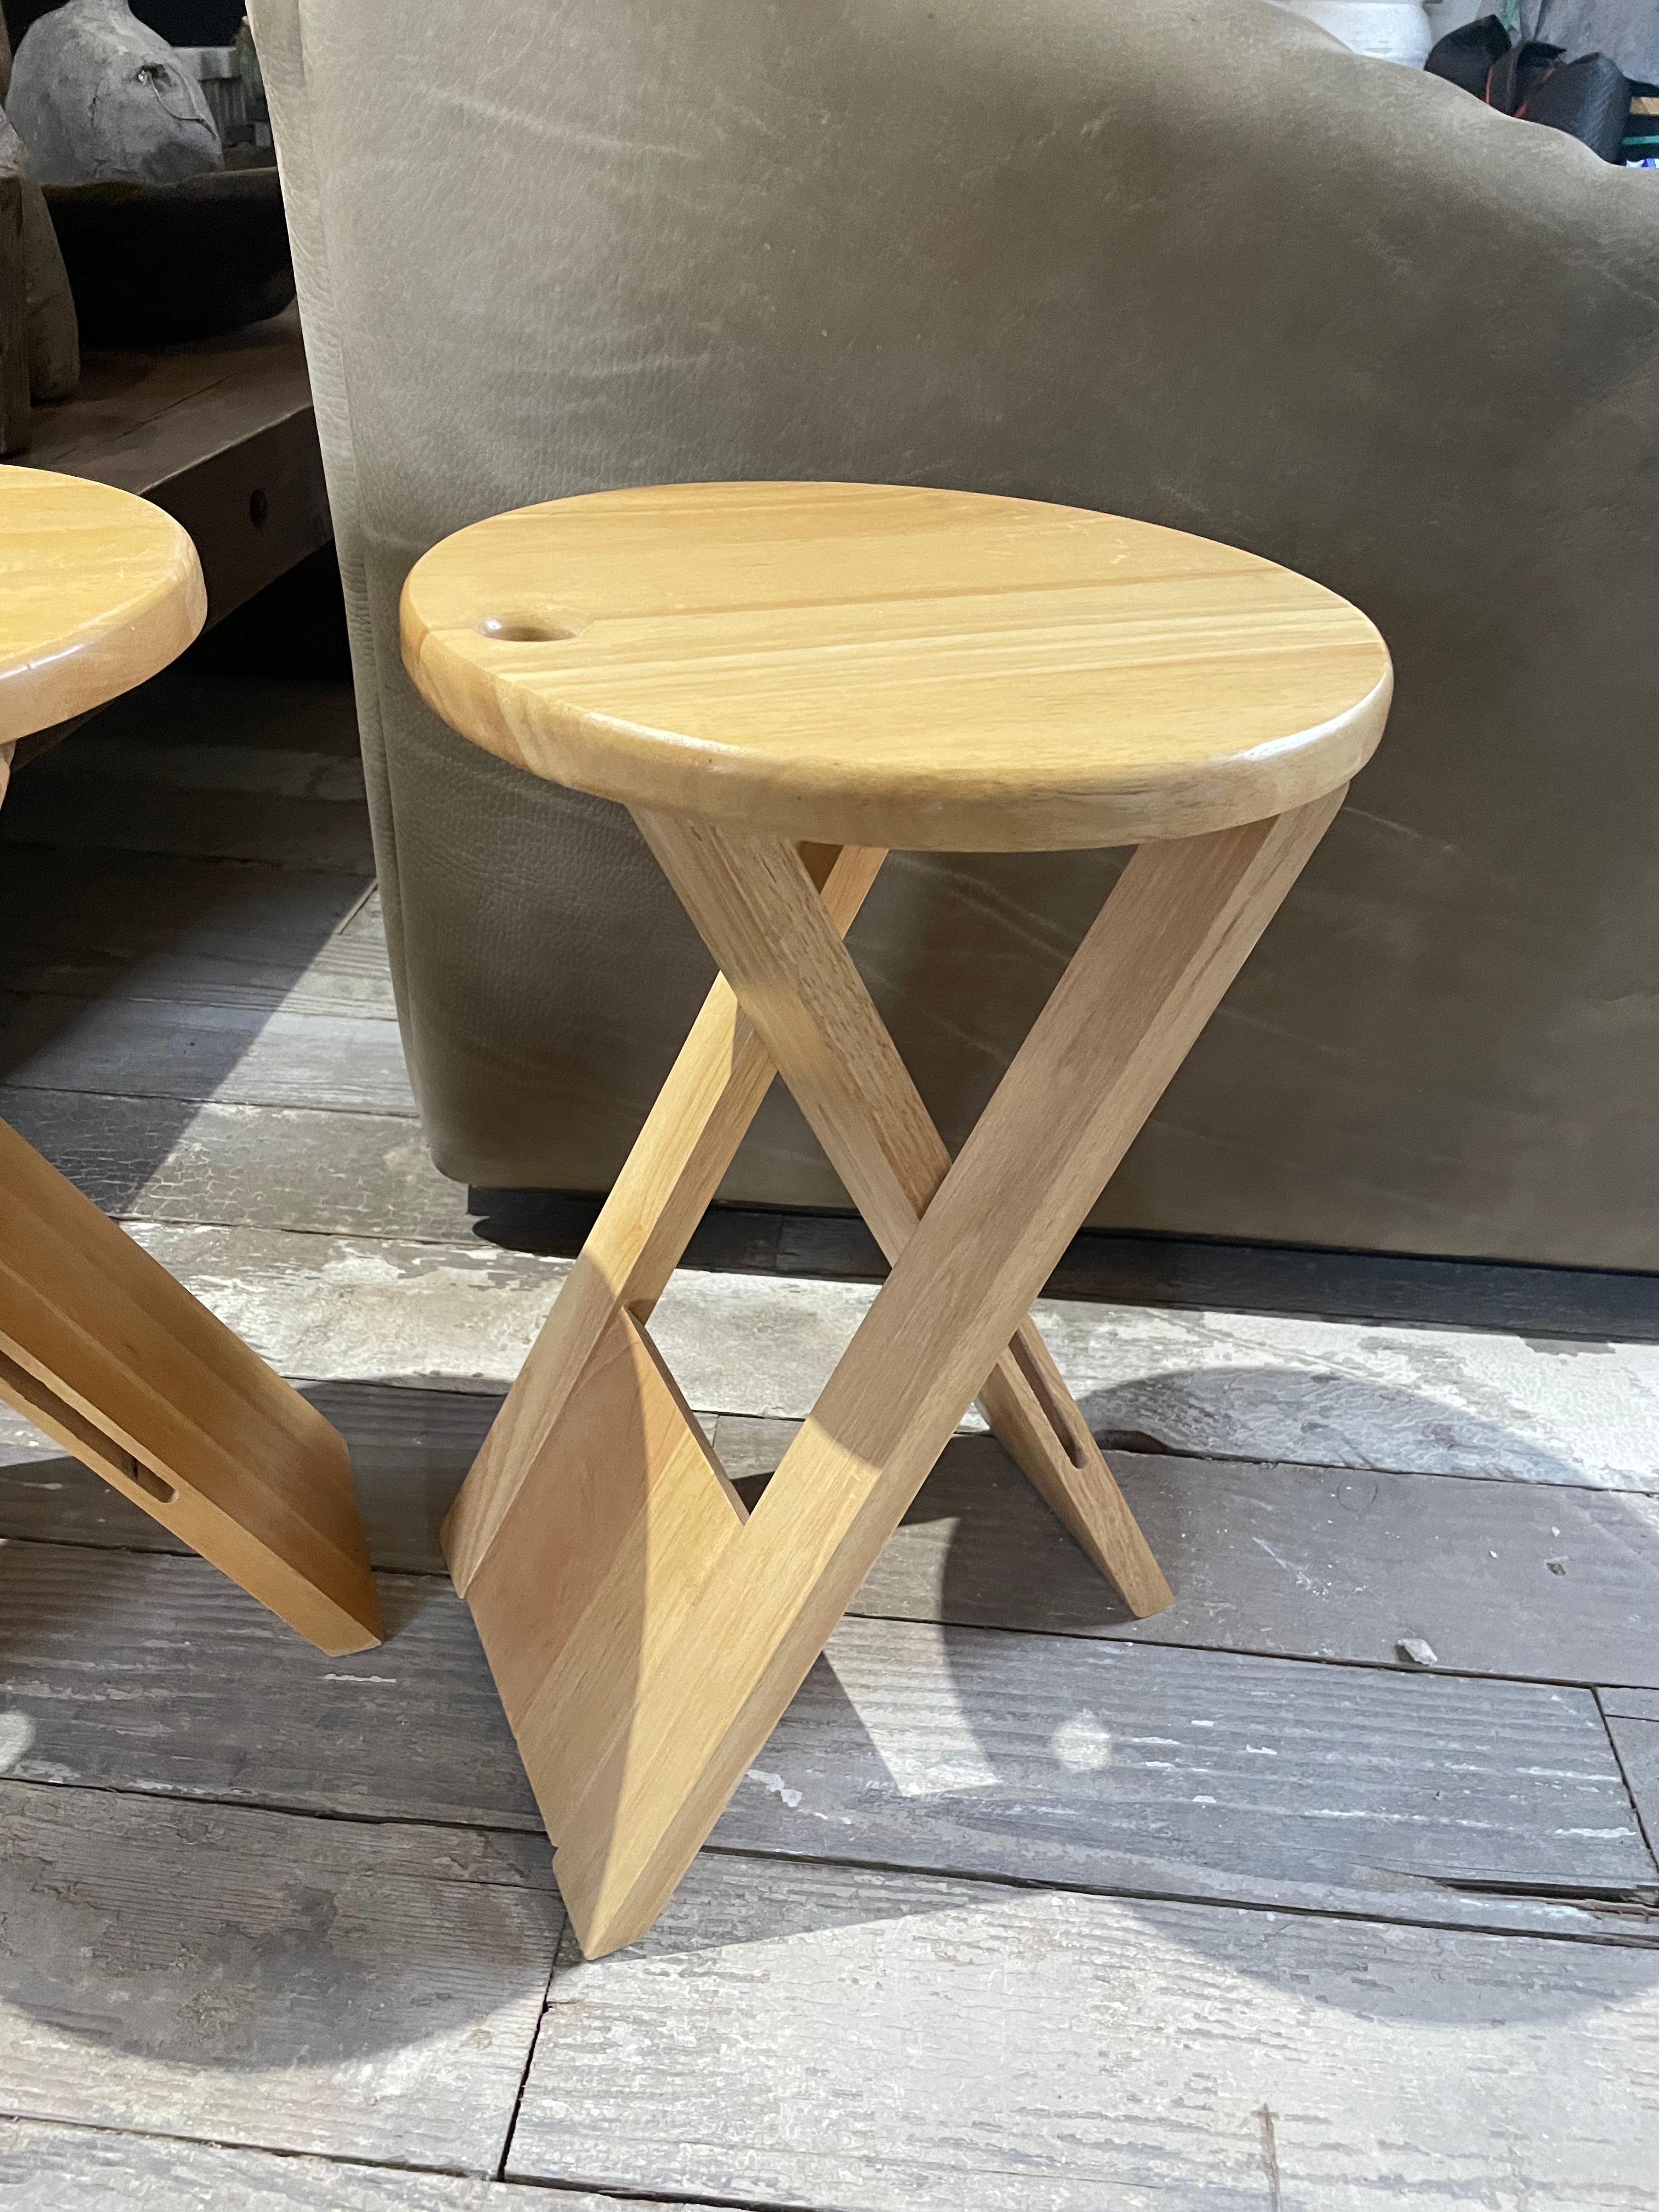 Late 20th Century Mid-Century Pair of Roger Tallon TS Folding Stools for Sentou, France 1970s For Sale